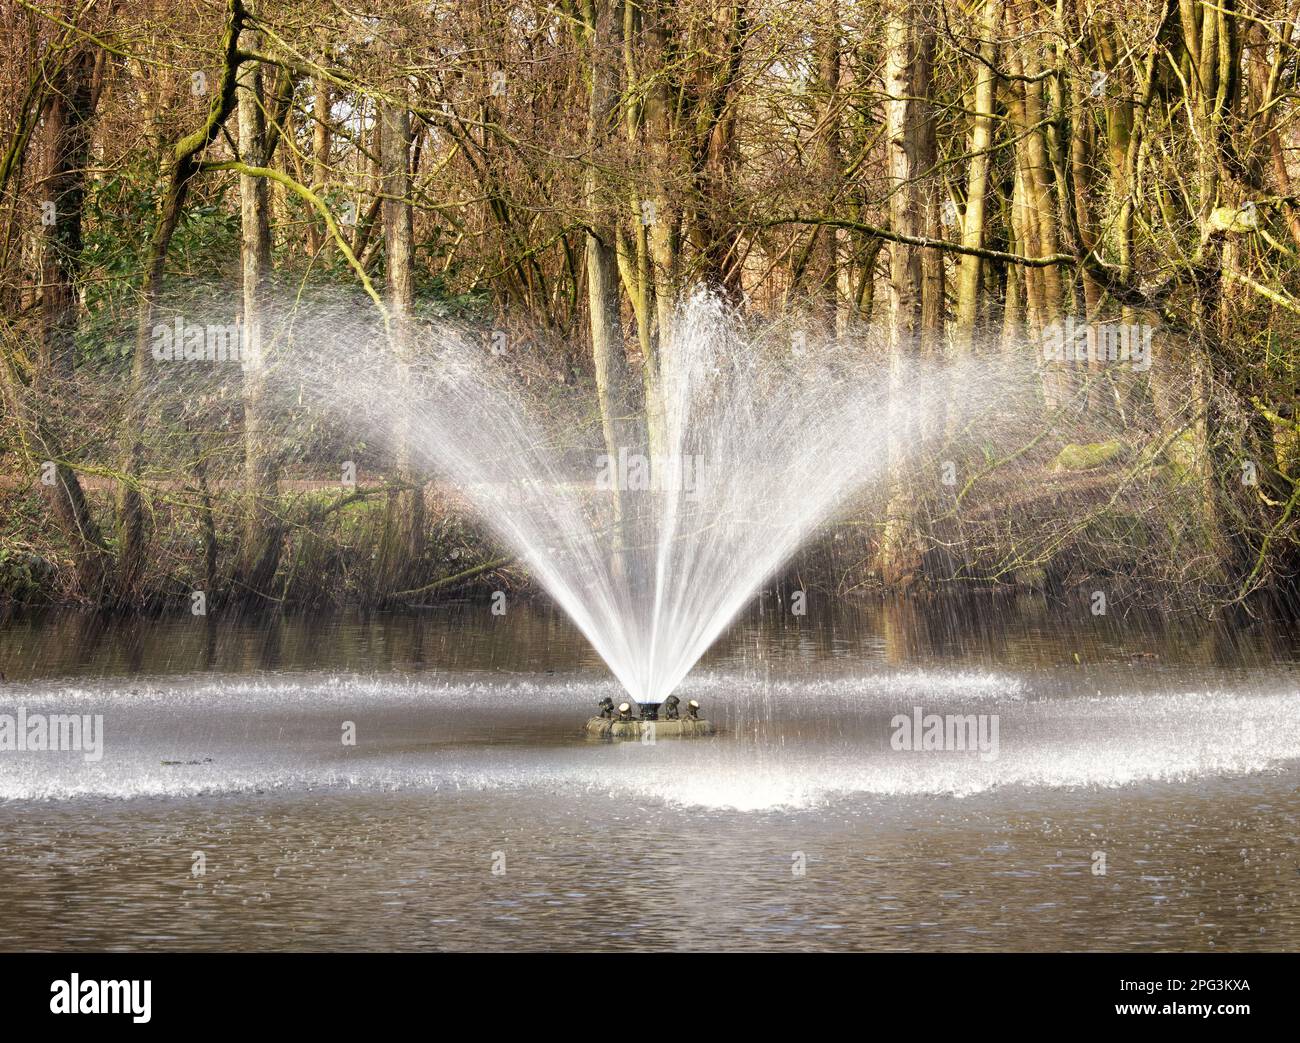 A spraying water feature on a park lake, Photographed at Lytham Hall, Lancashire Stock Photo